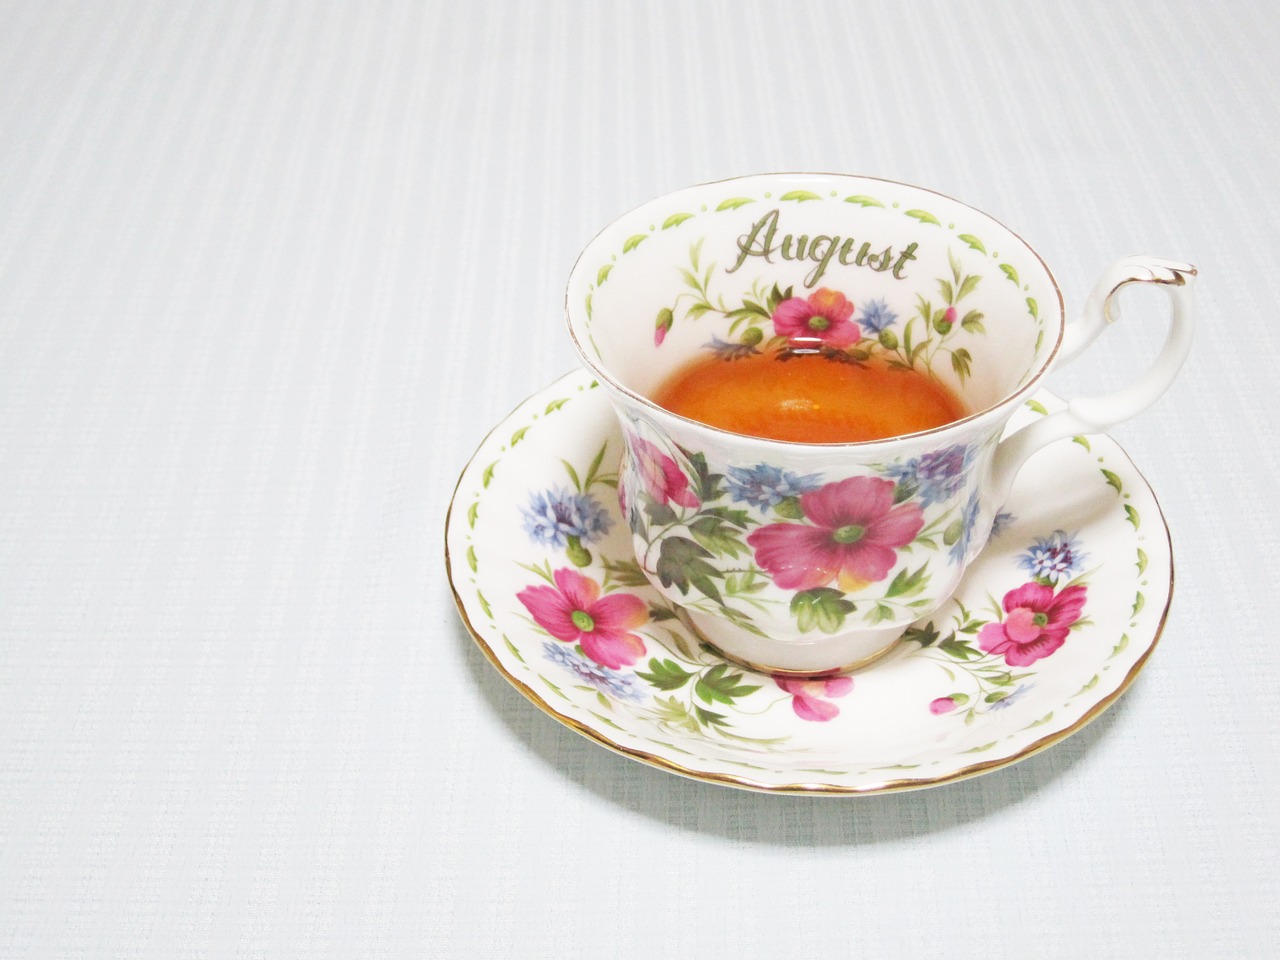 tea time cup august free photo